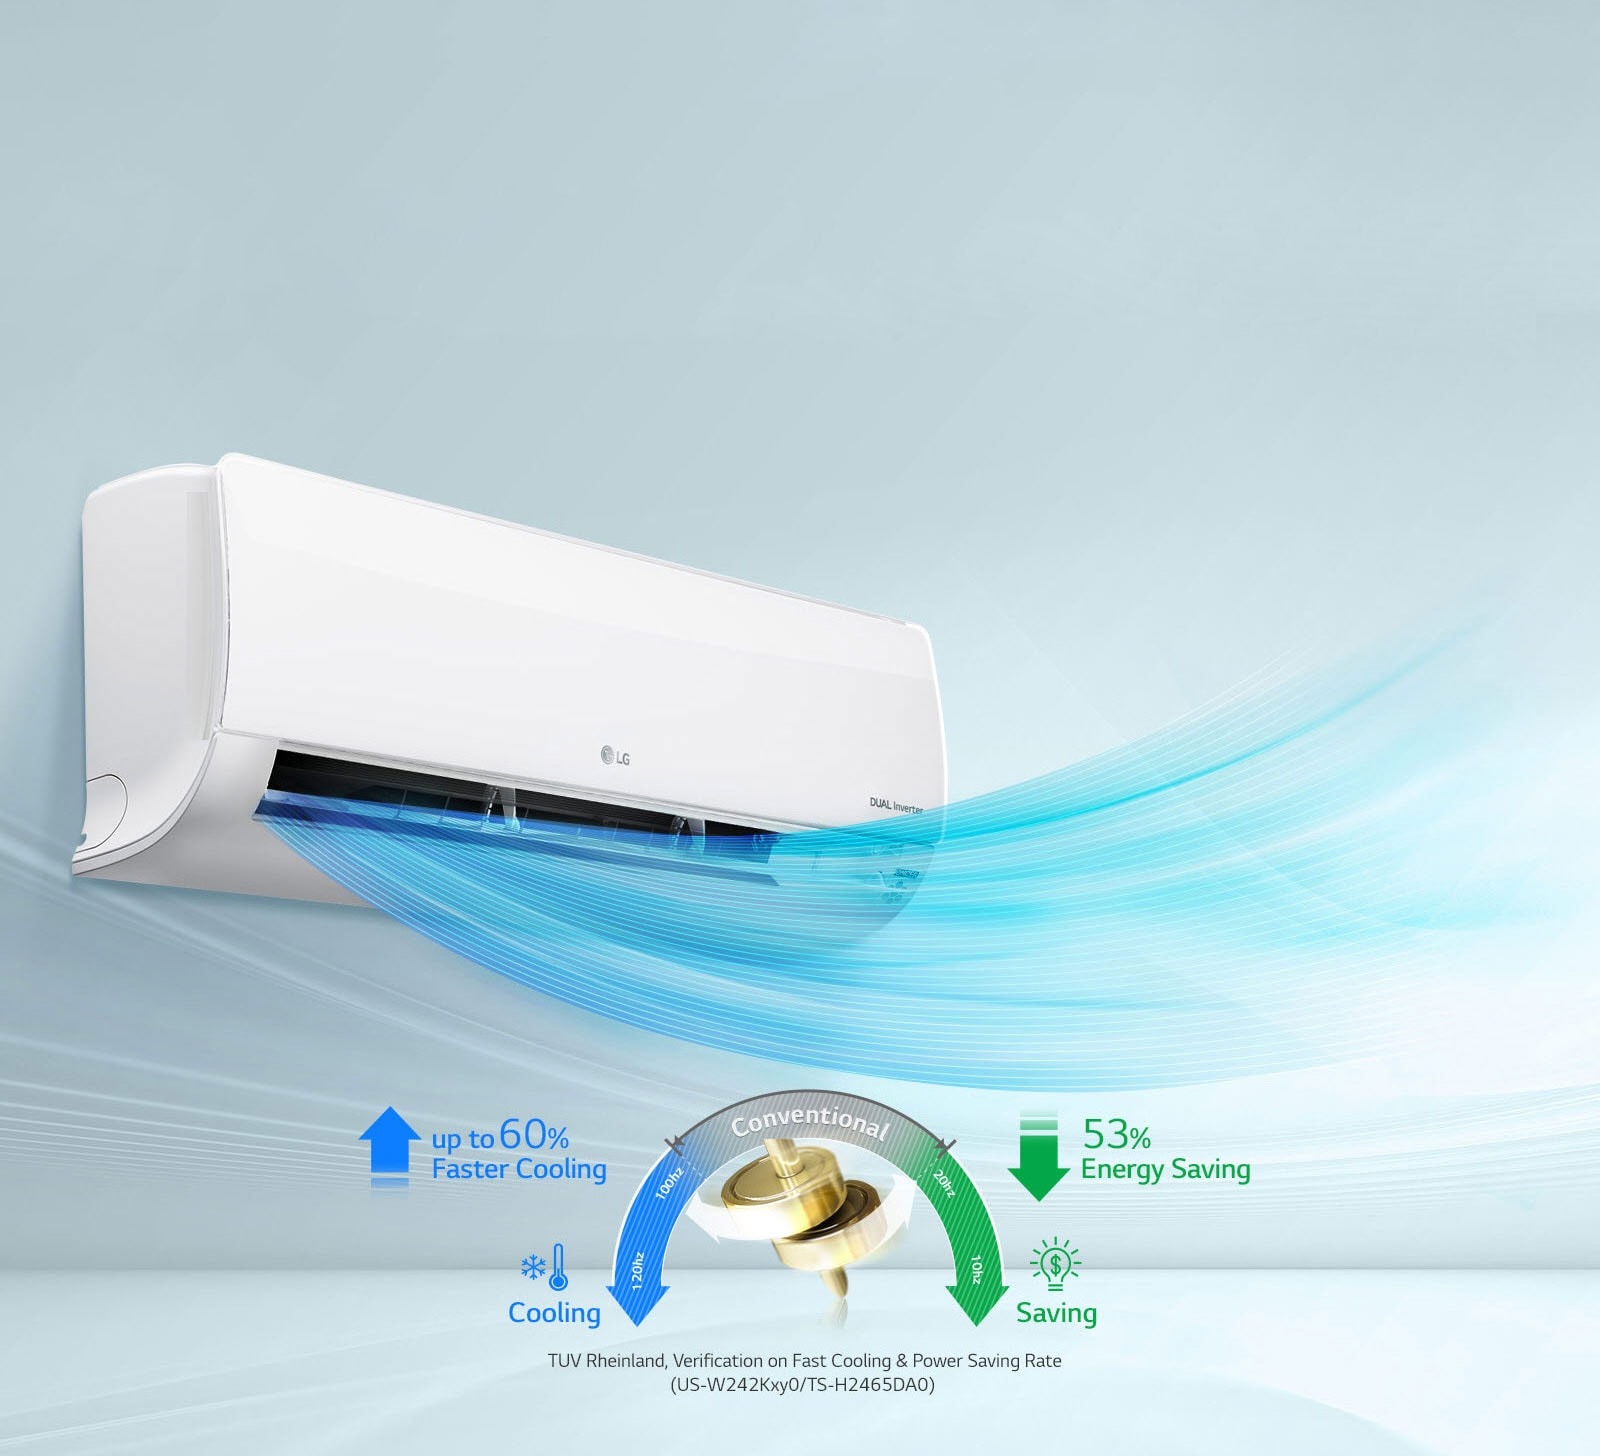 Fast_Cooling-and-Energy-Saving_04032019_D